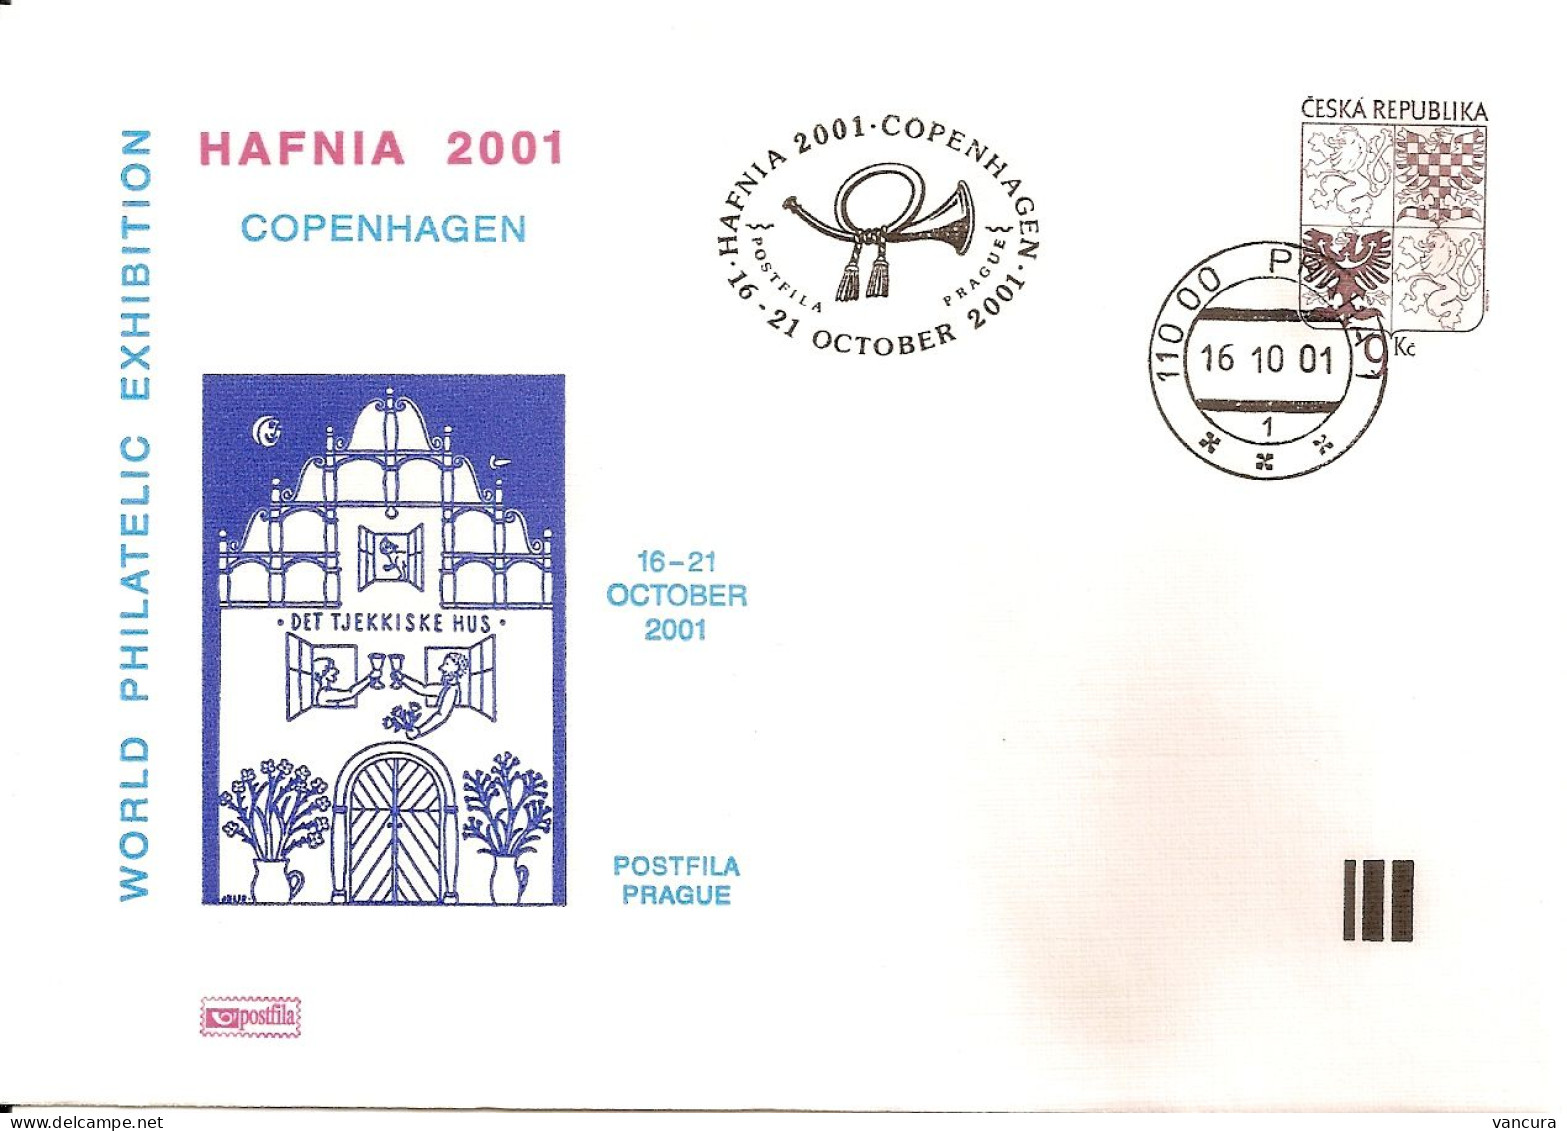 COB A 75 Czech Republic Hafnia Stamp Exhibition 2001 NOTICE POOR SCAN, BUT THE COVER IS FINE! - Buste